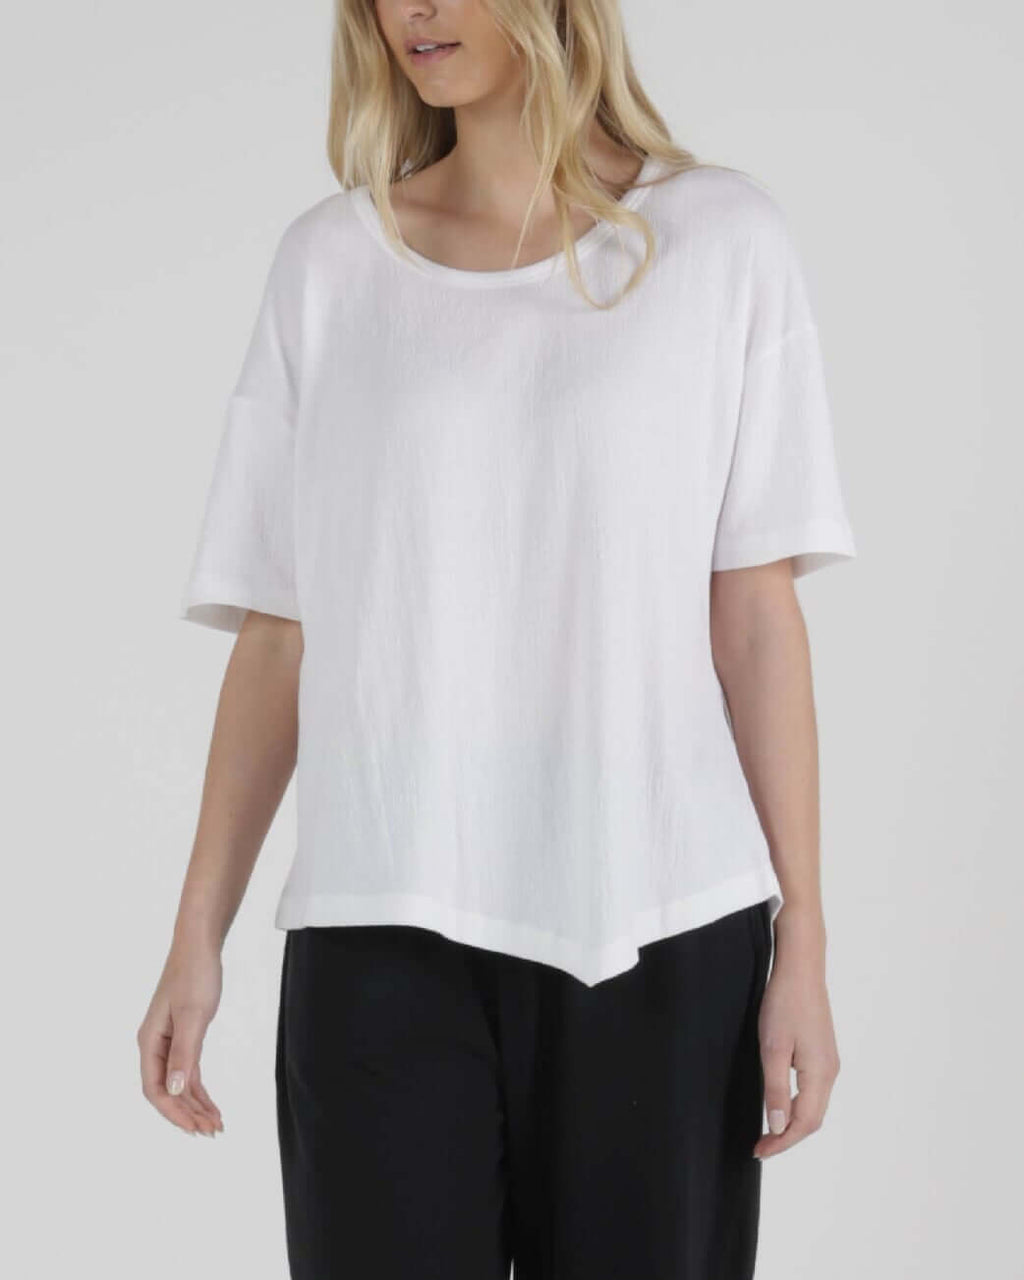 Betty Basics Florence Top in White Betty BasicsBetty Basics, Black, black jumper, black knit, jumper, Knit, top